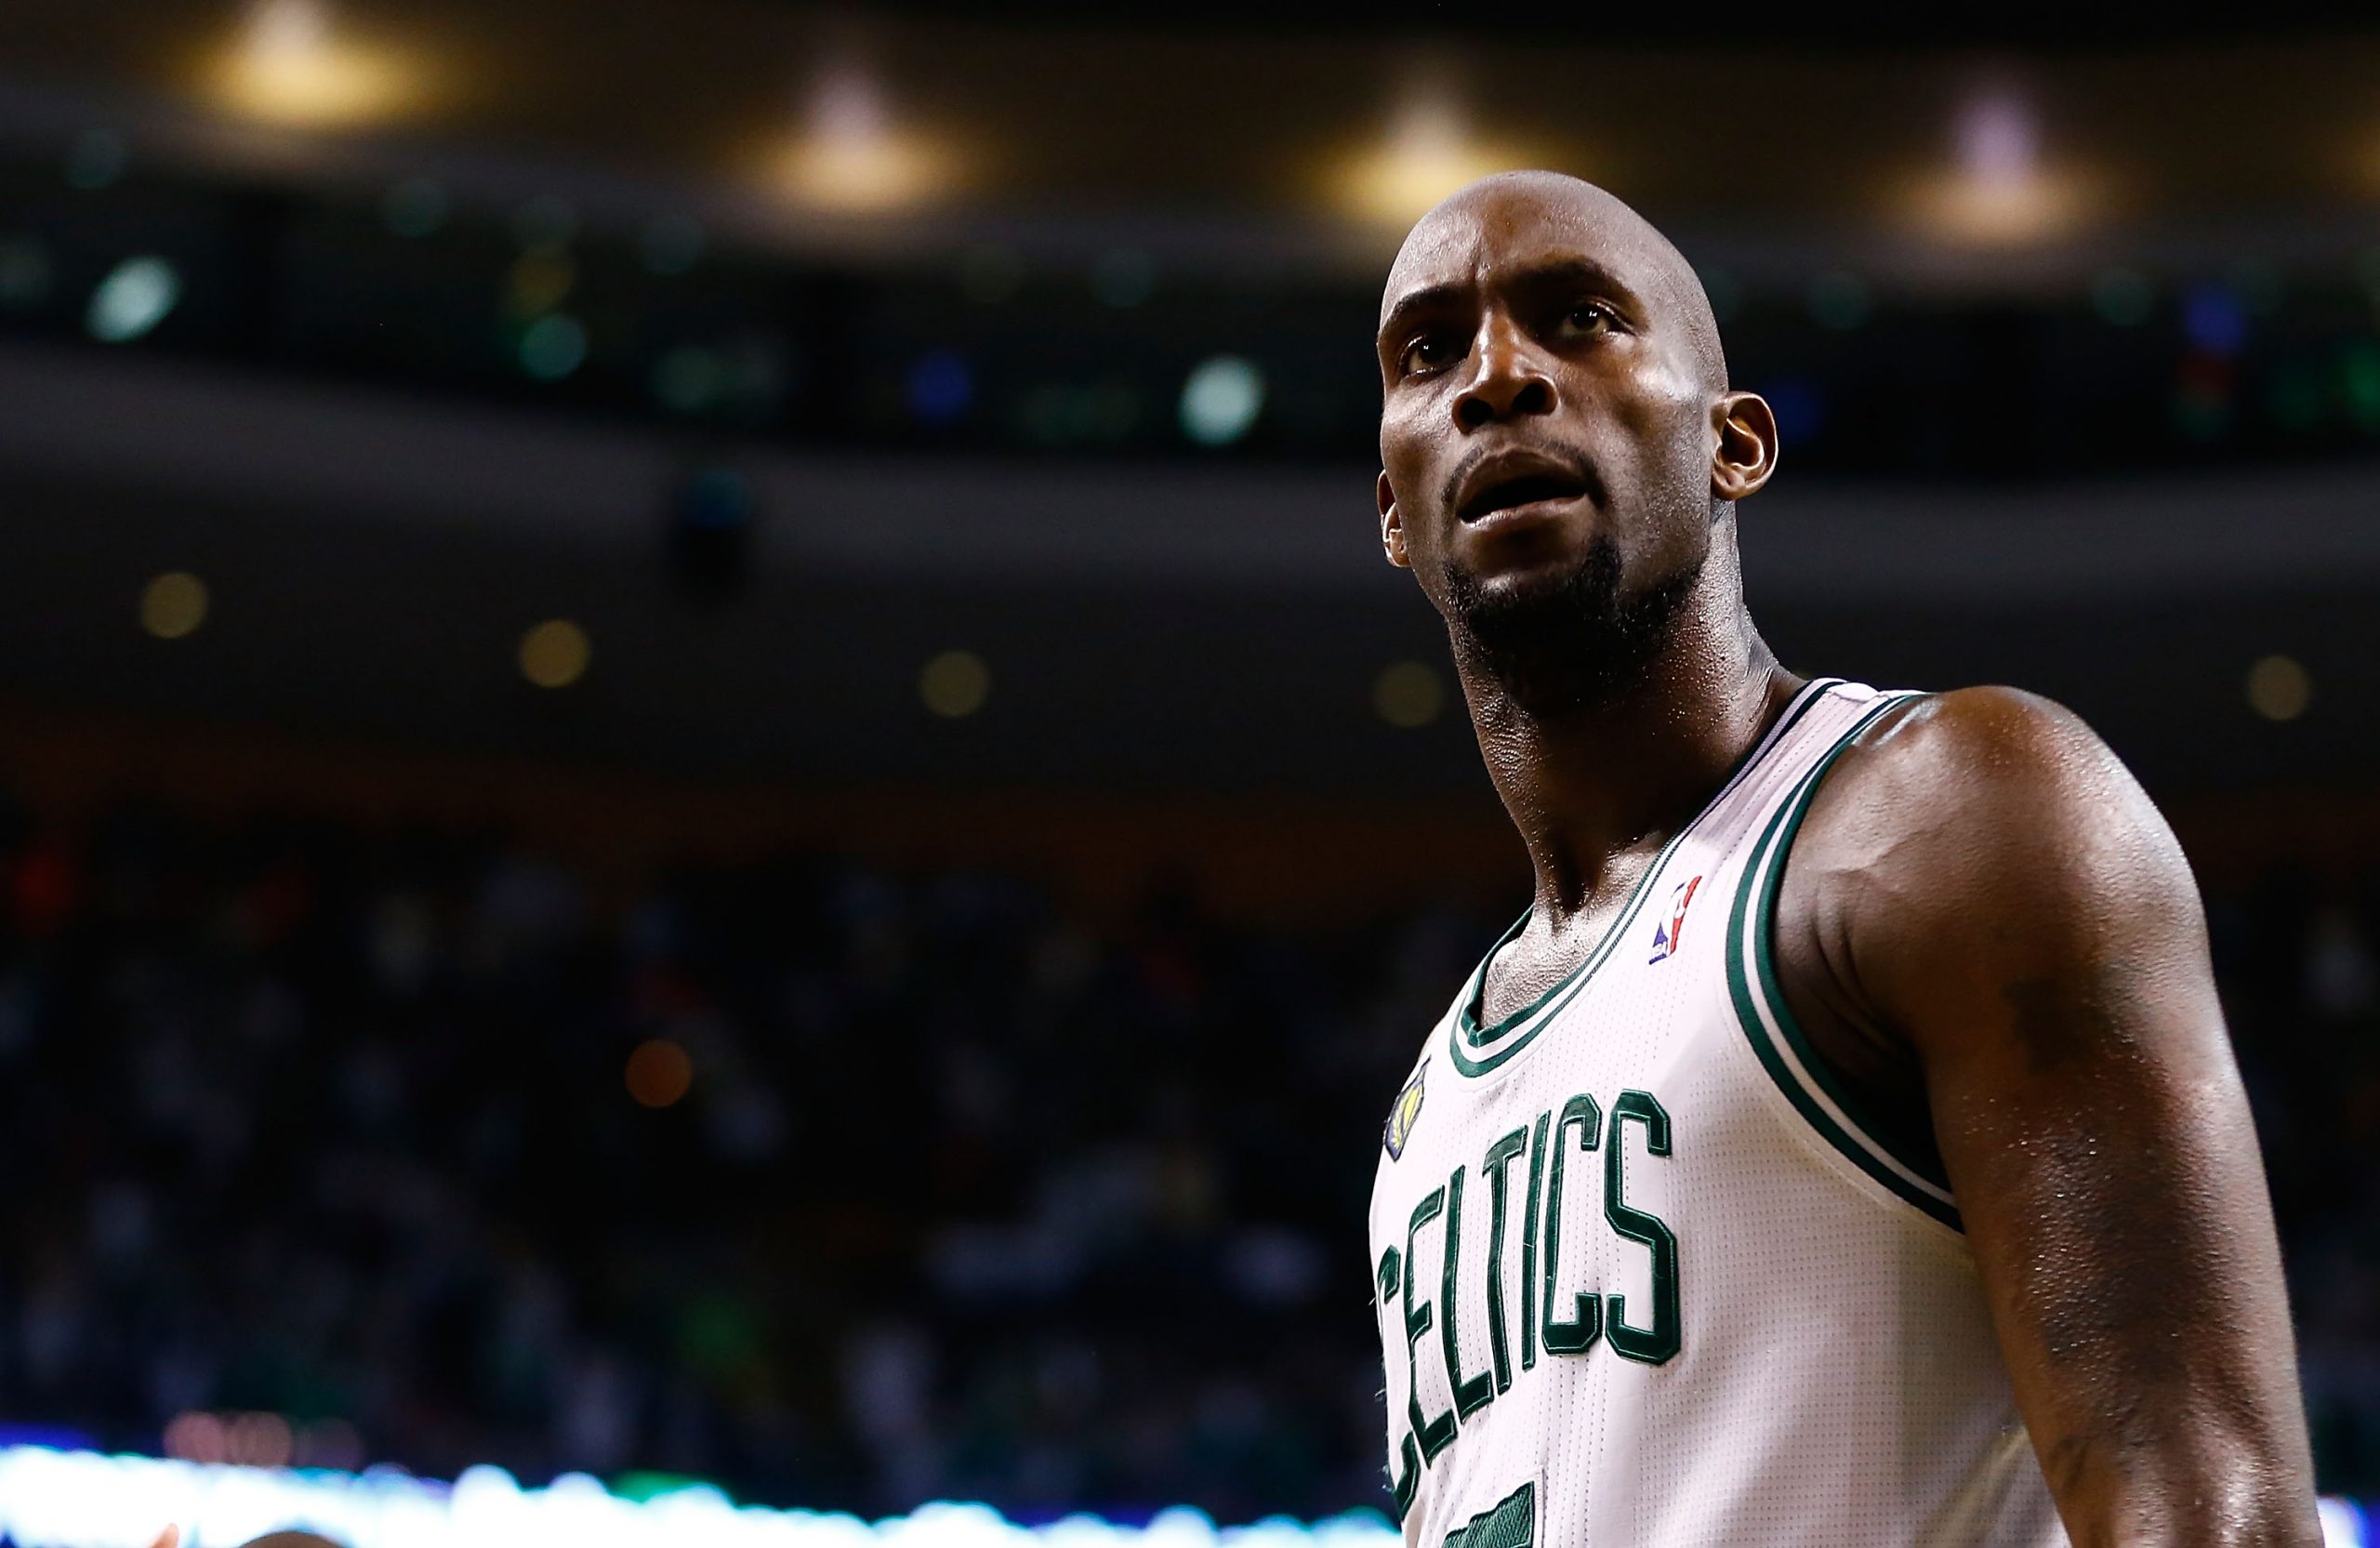 Kevin Garnett of the Boston Celtics reacts following their overtime win against the New York Knicks.